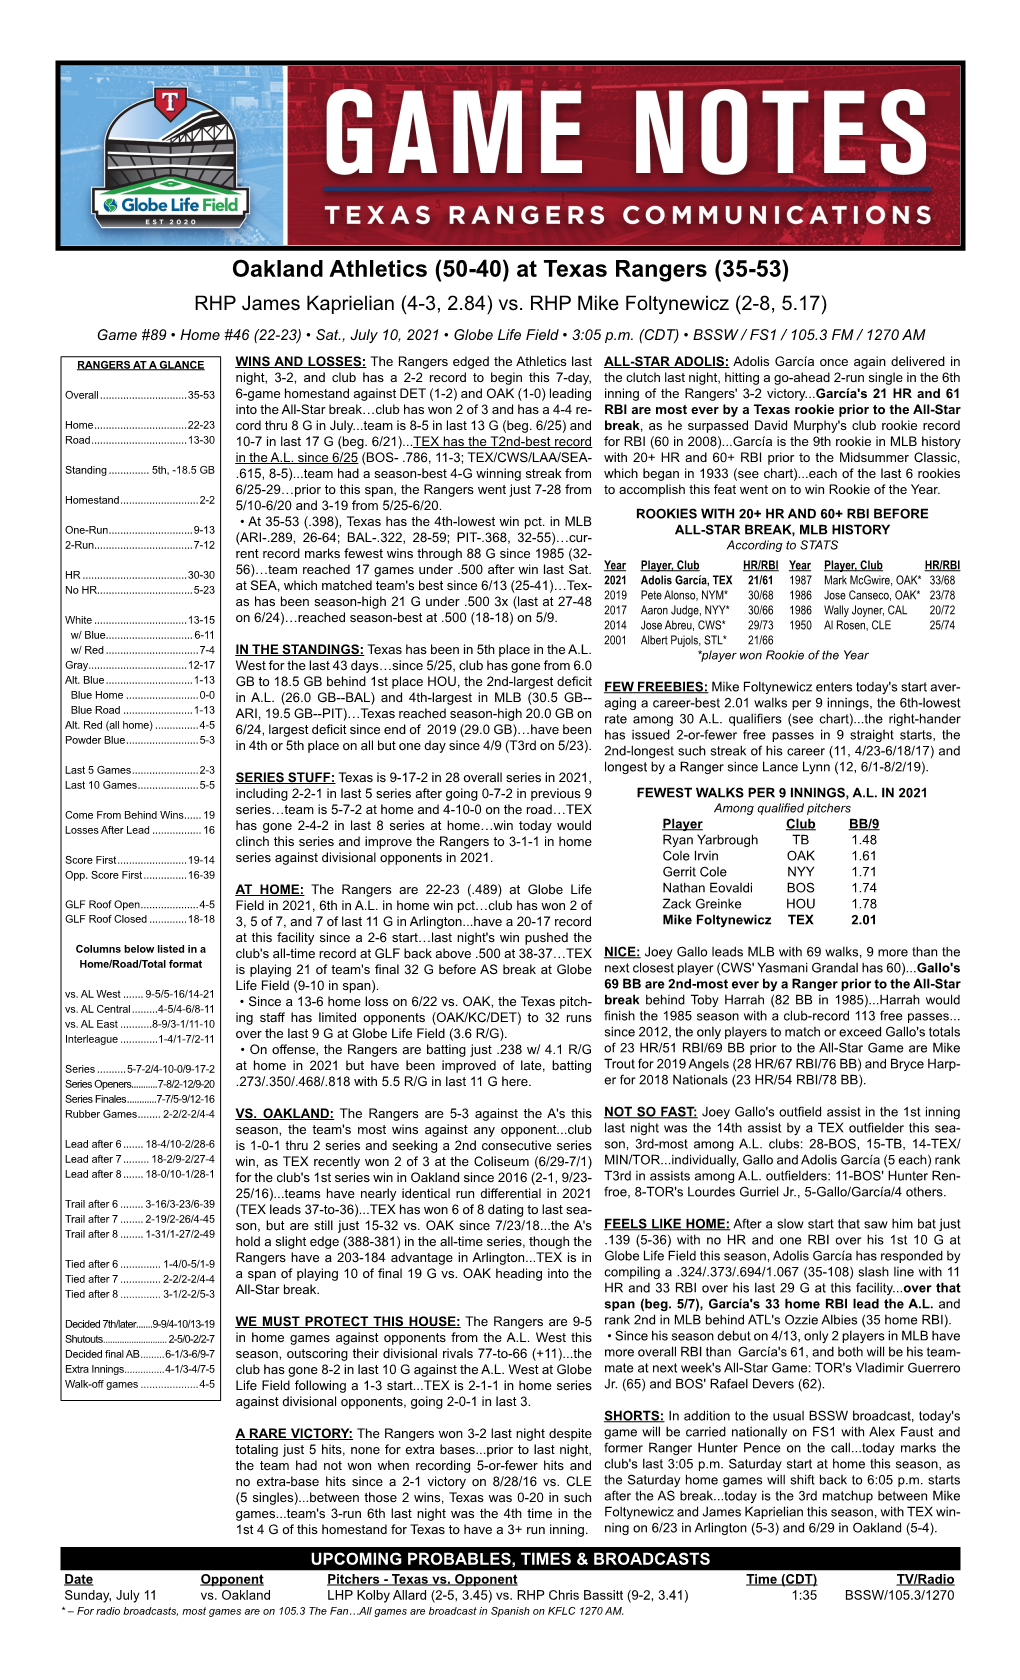 07-10-2021 Rangers Game Notes